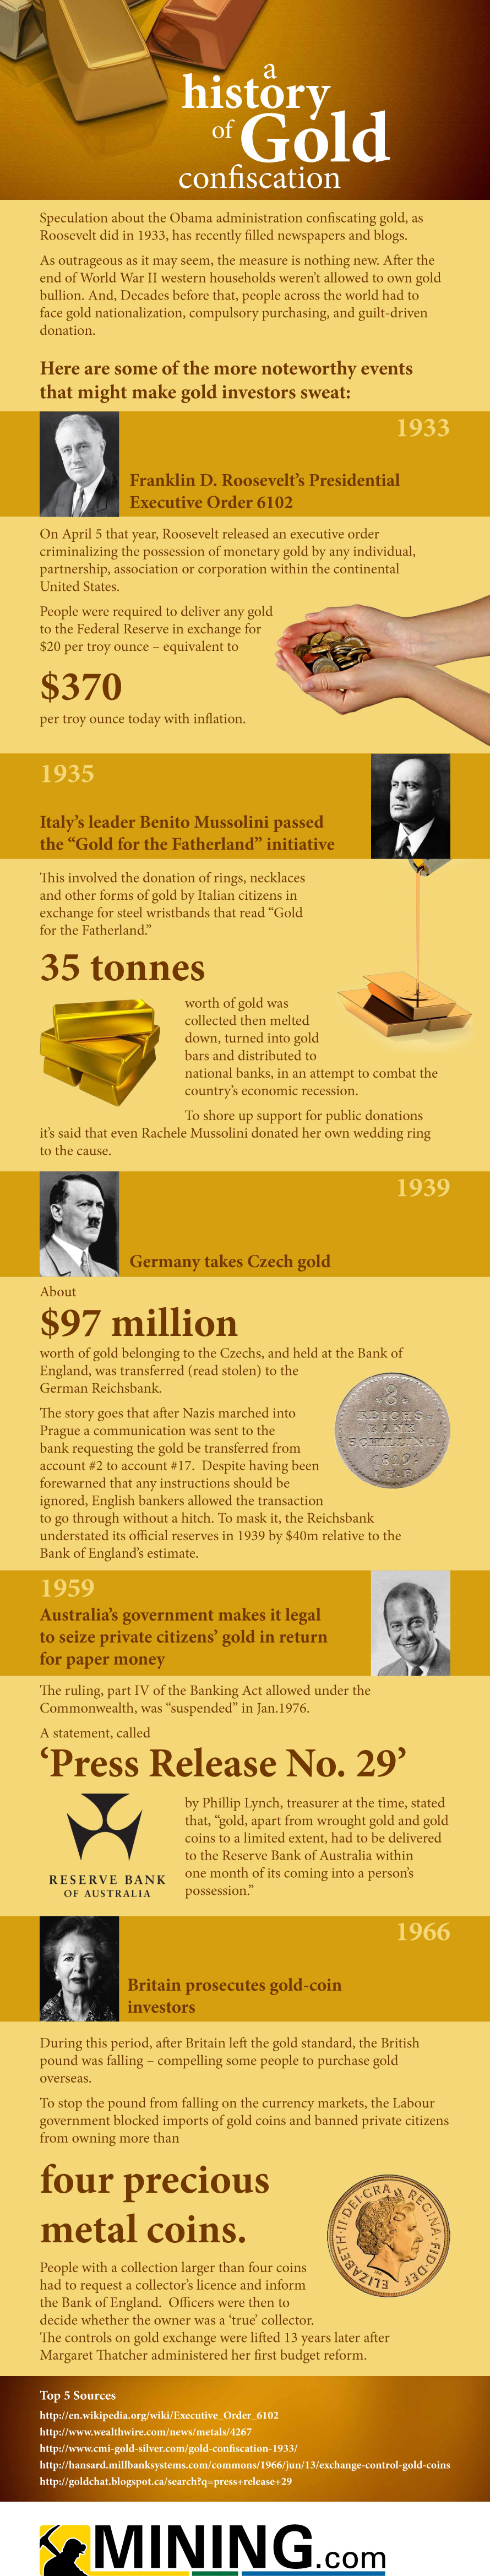 history-of-gold-confiscation